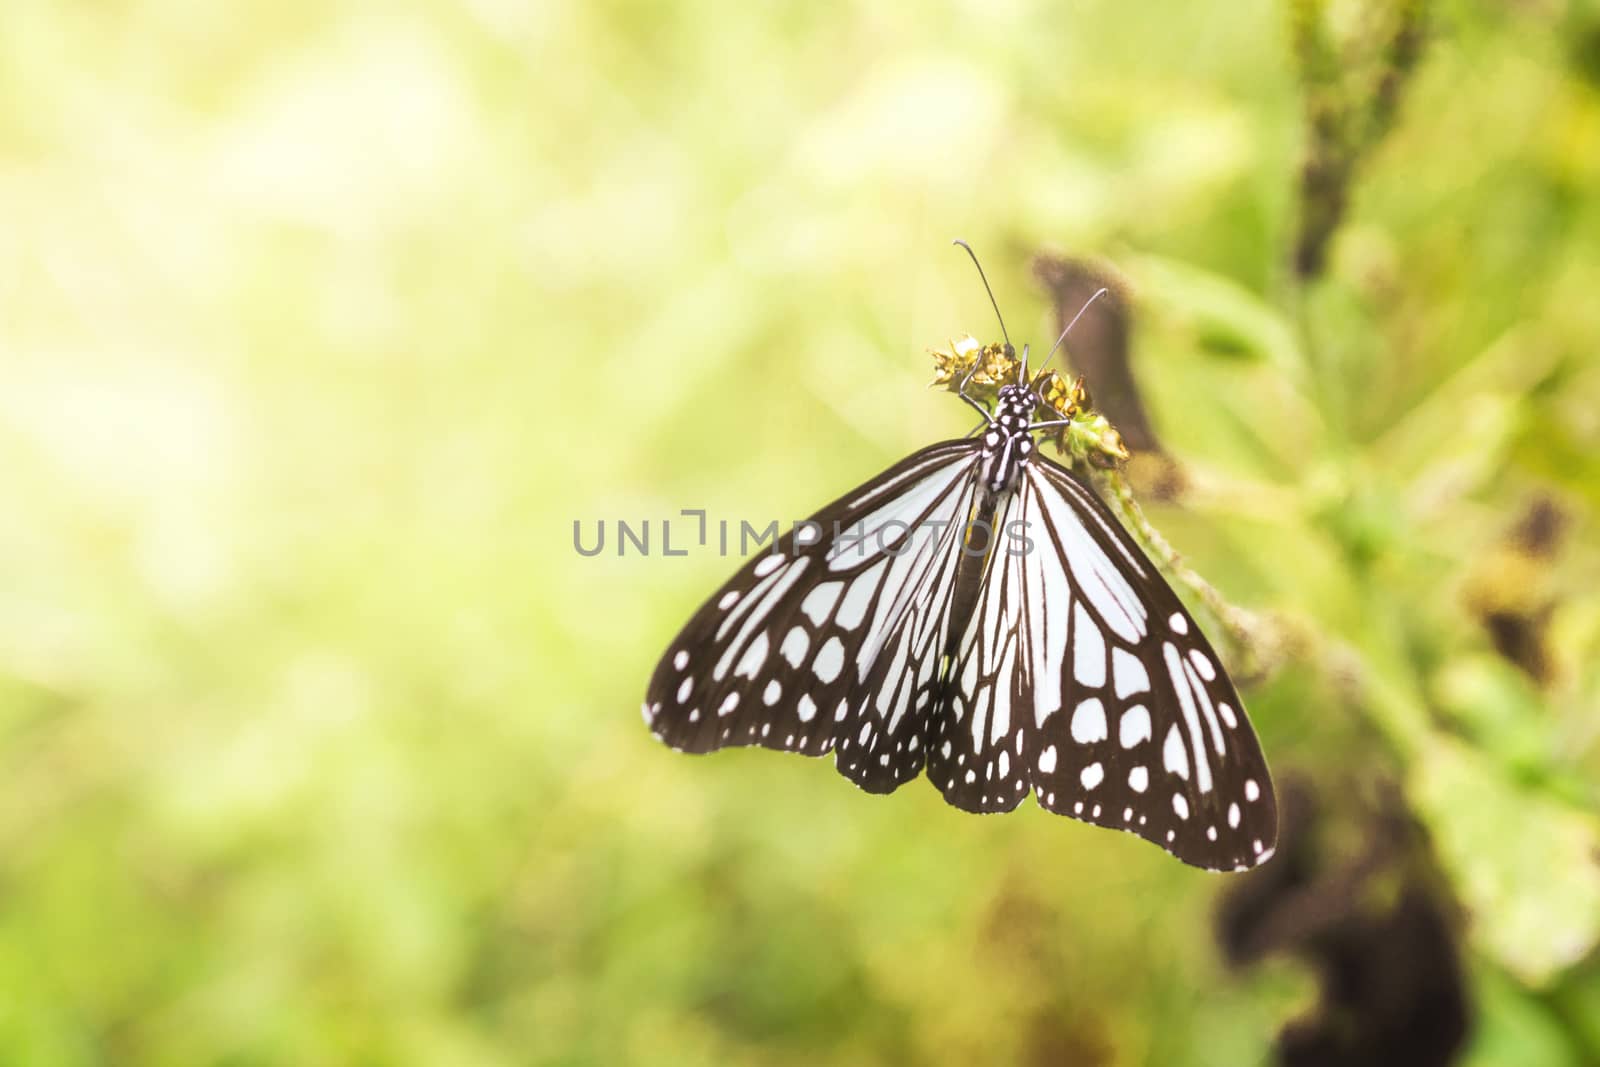 Beautiful Butterfly Catch On Flowers With Bokeh Background Light, Natural For Background.
